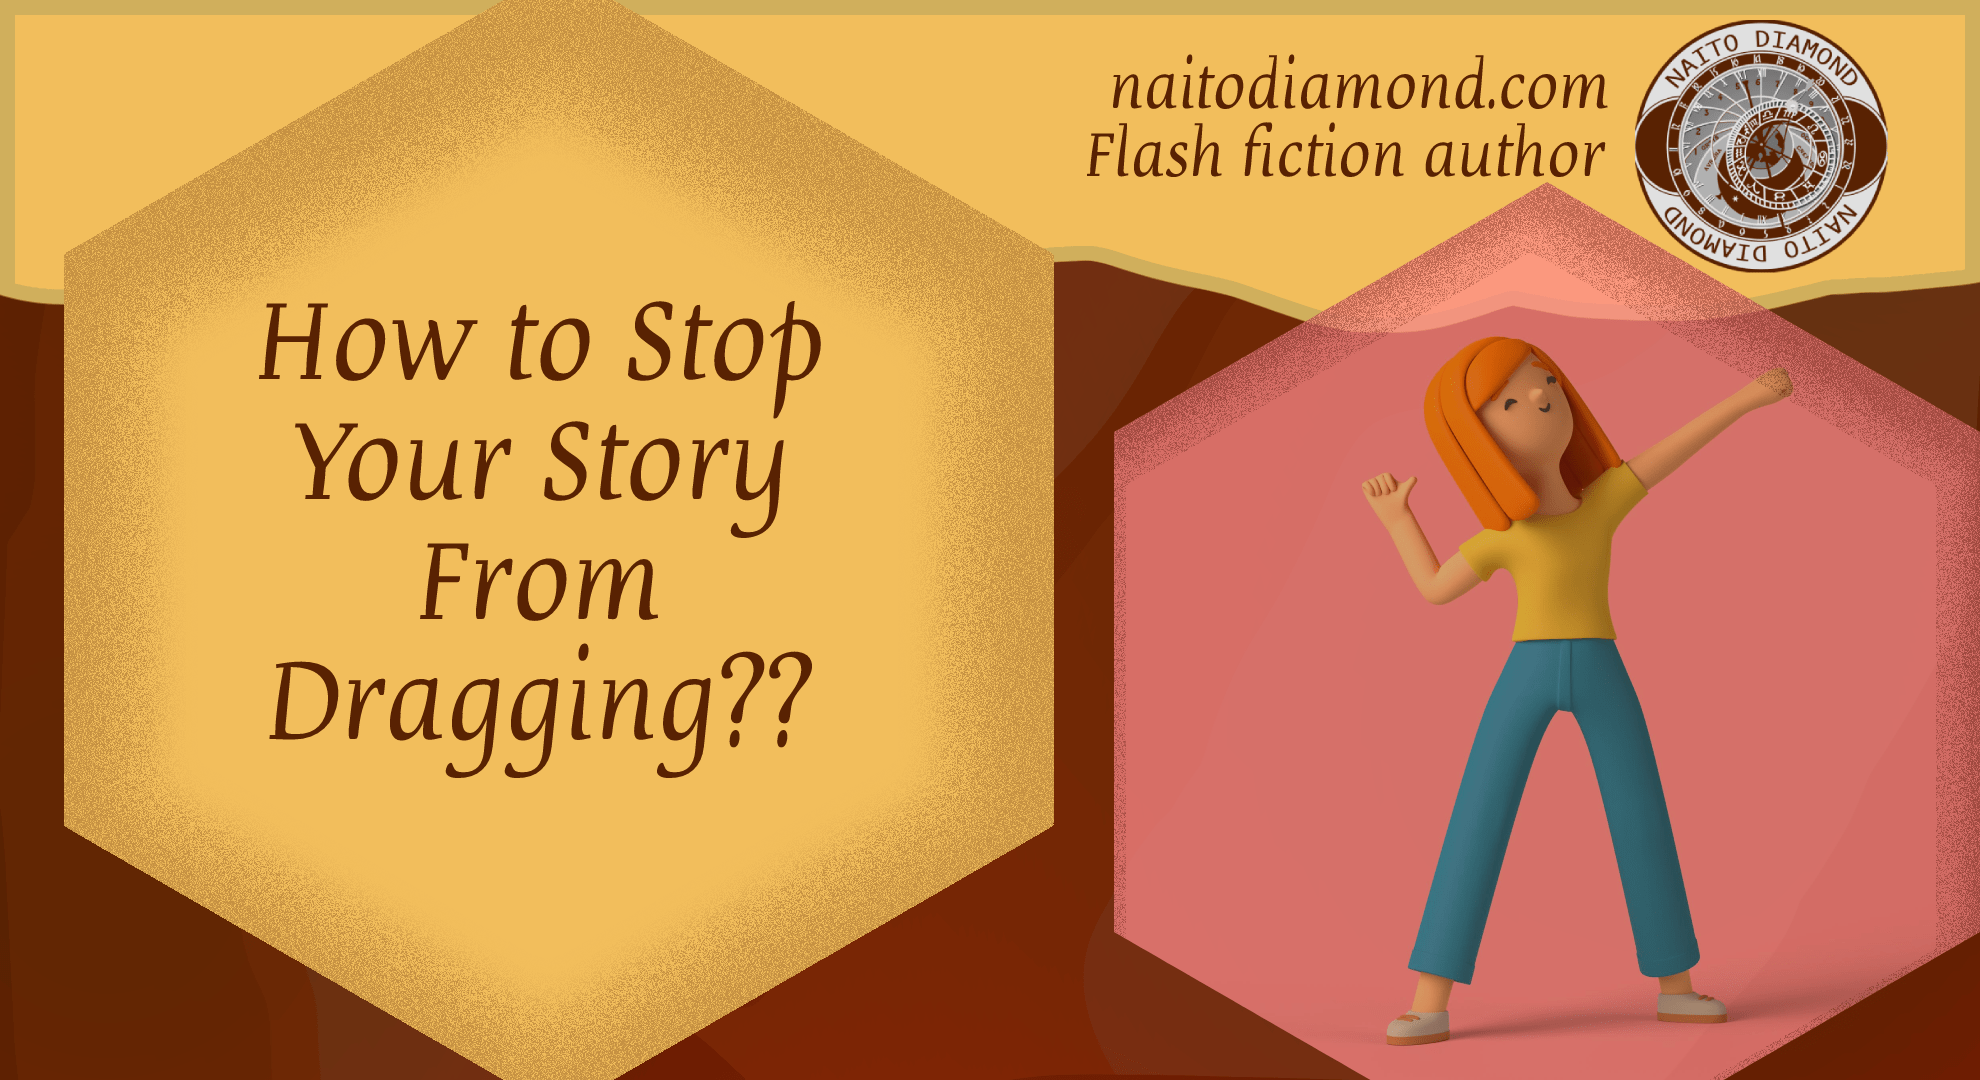 How to Stop Your Story From Dragging?